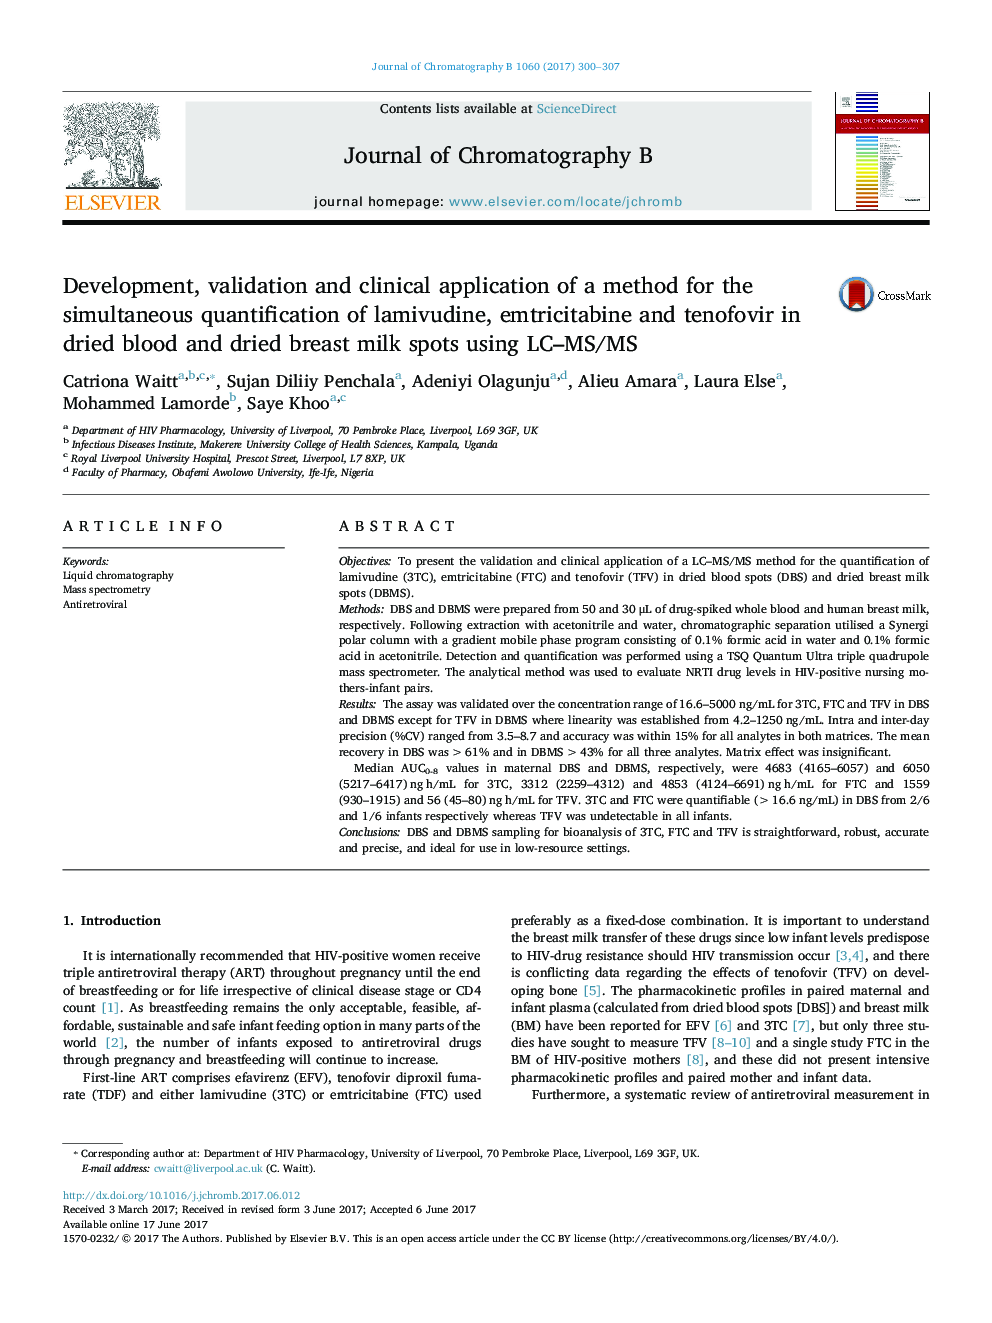 Development, validation and clinical application of a method for the simultaneous quantification of lamivudine, emtricitabine and tenofovir in dried blood and dried breast milk spots using LC-MS/MS